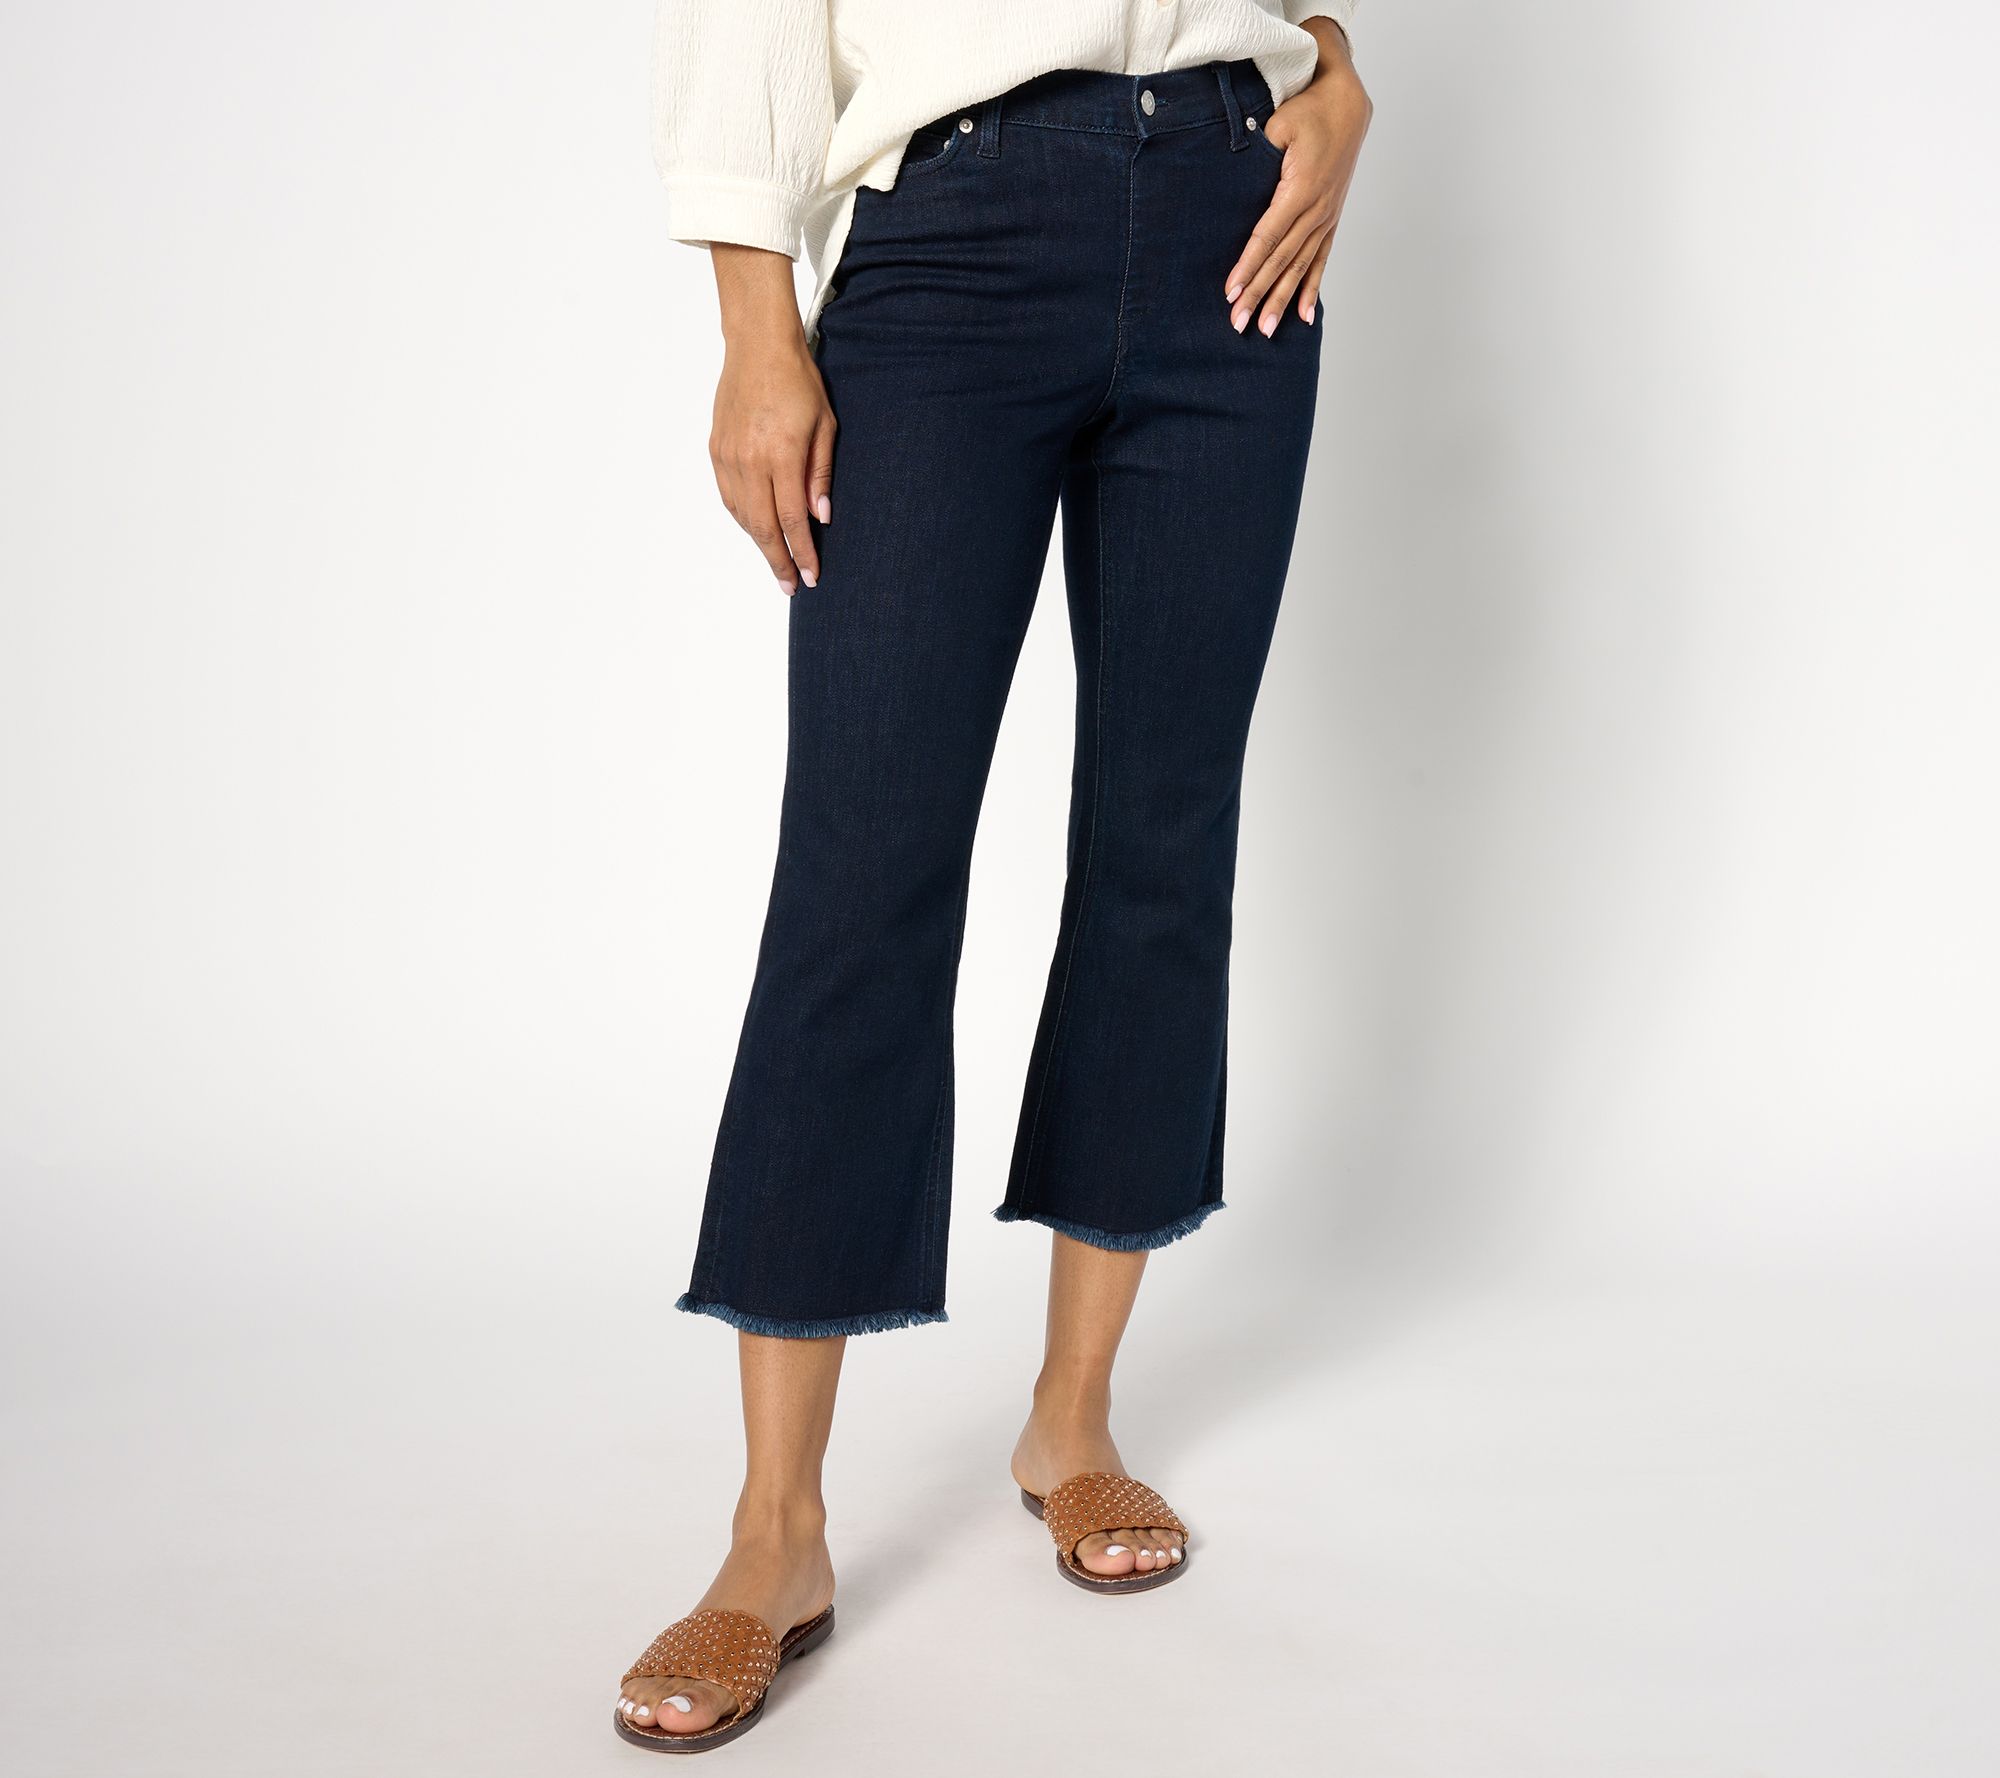 Denim & Co. Comfy Knit Air Tall Straight Crop Pant with Side Slits 